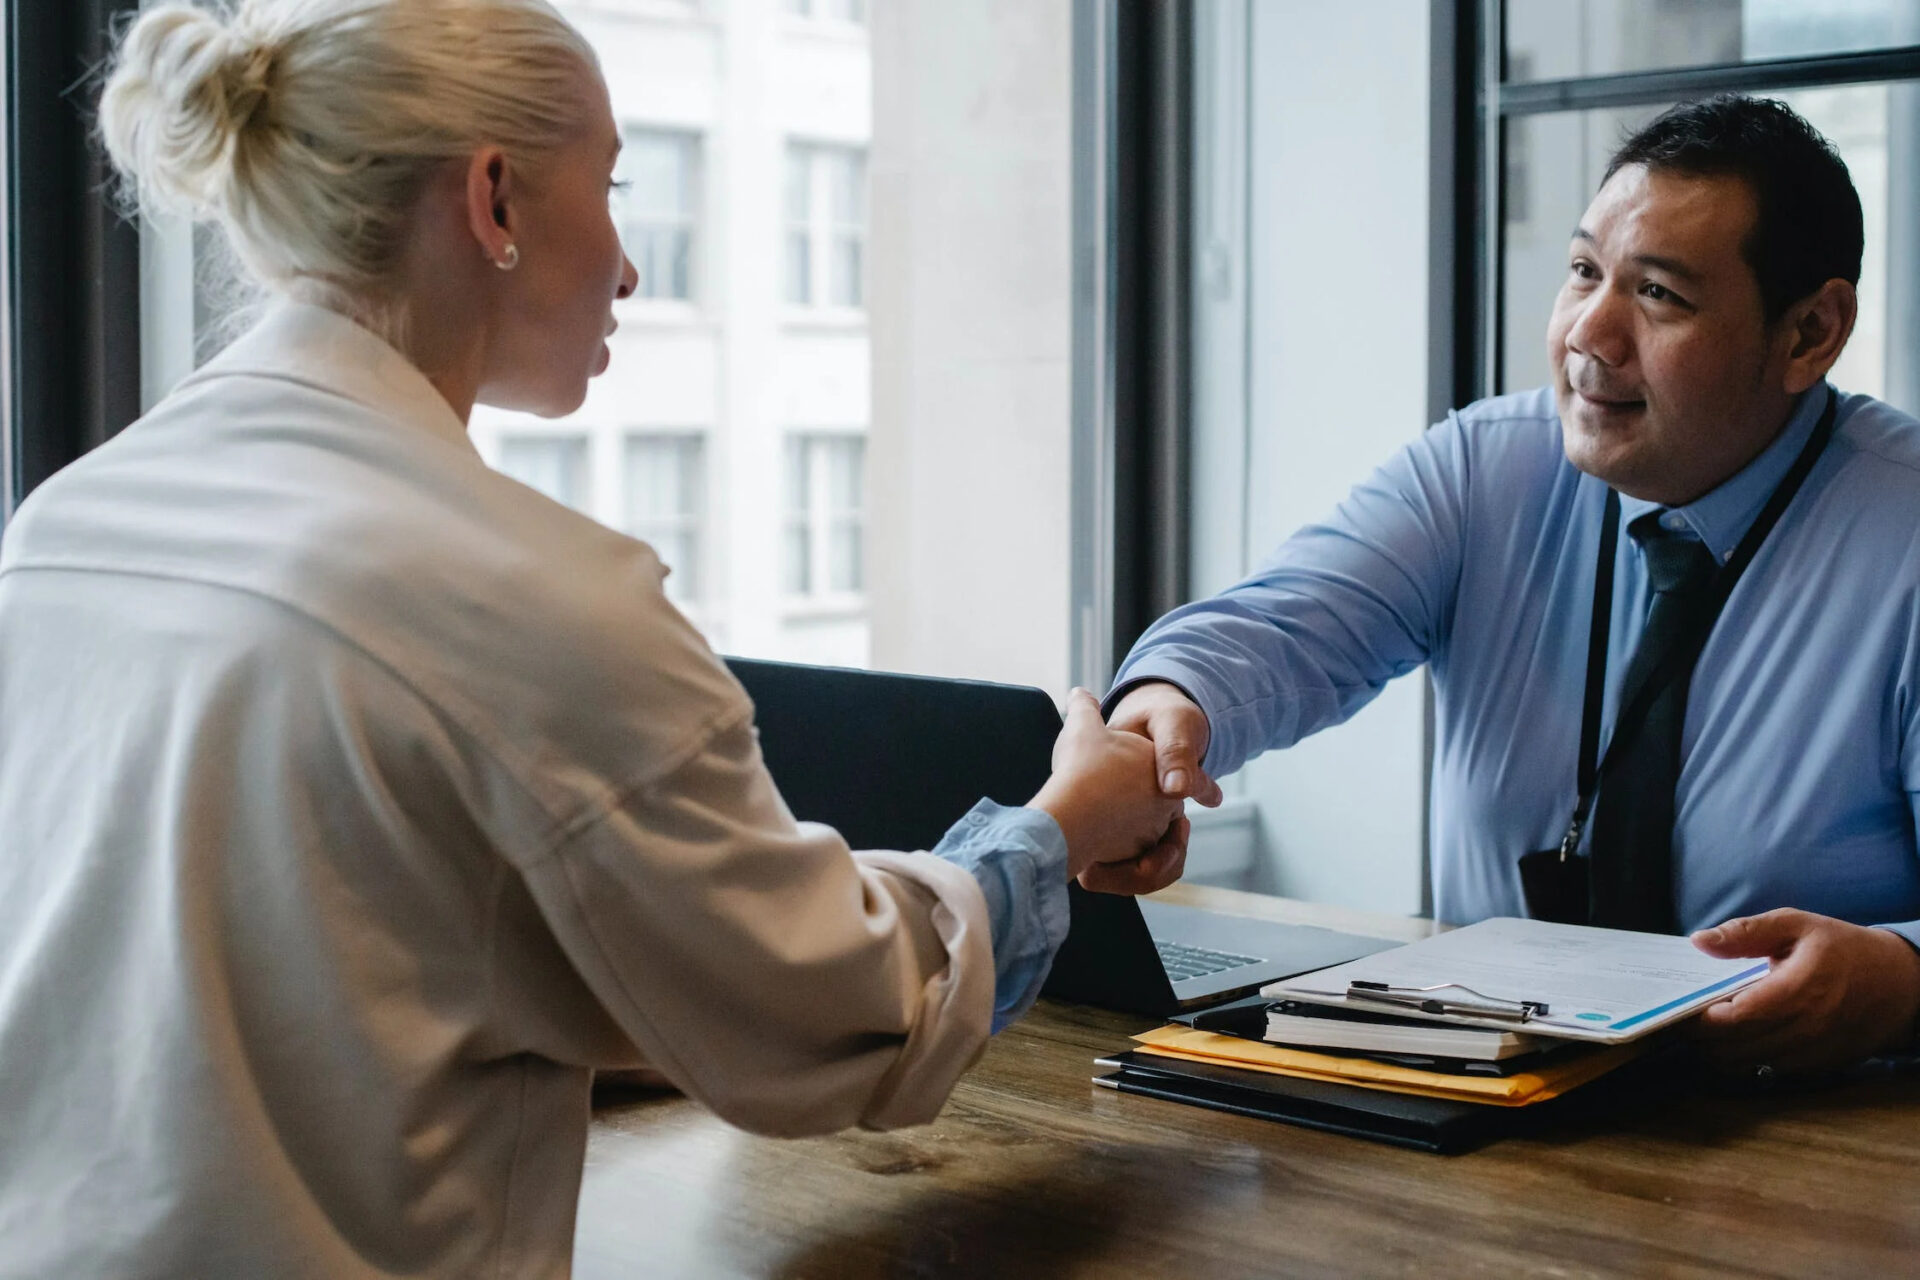 A professional looking person wearing a blue shirt and tie is shaking hands with a blonde haired woman in an office over a stack of documents